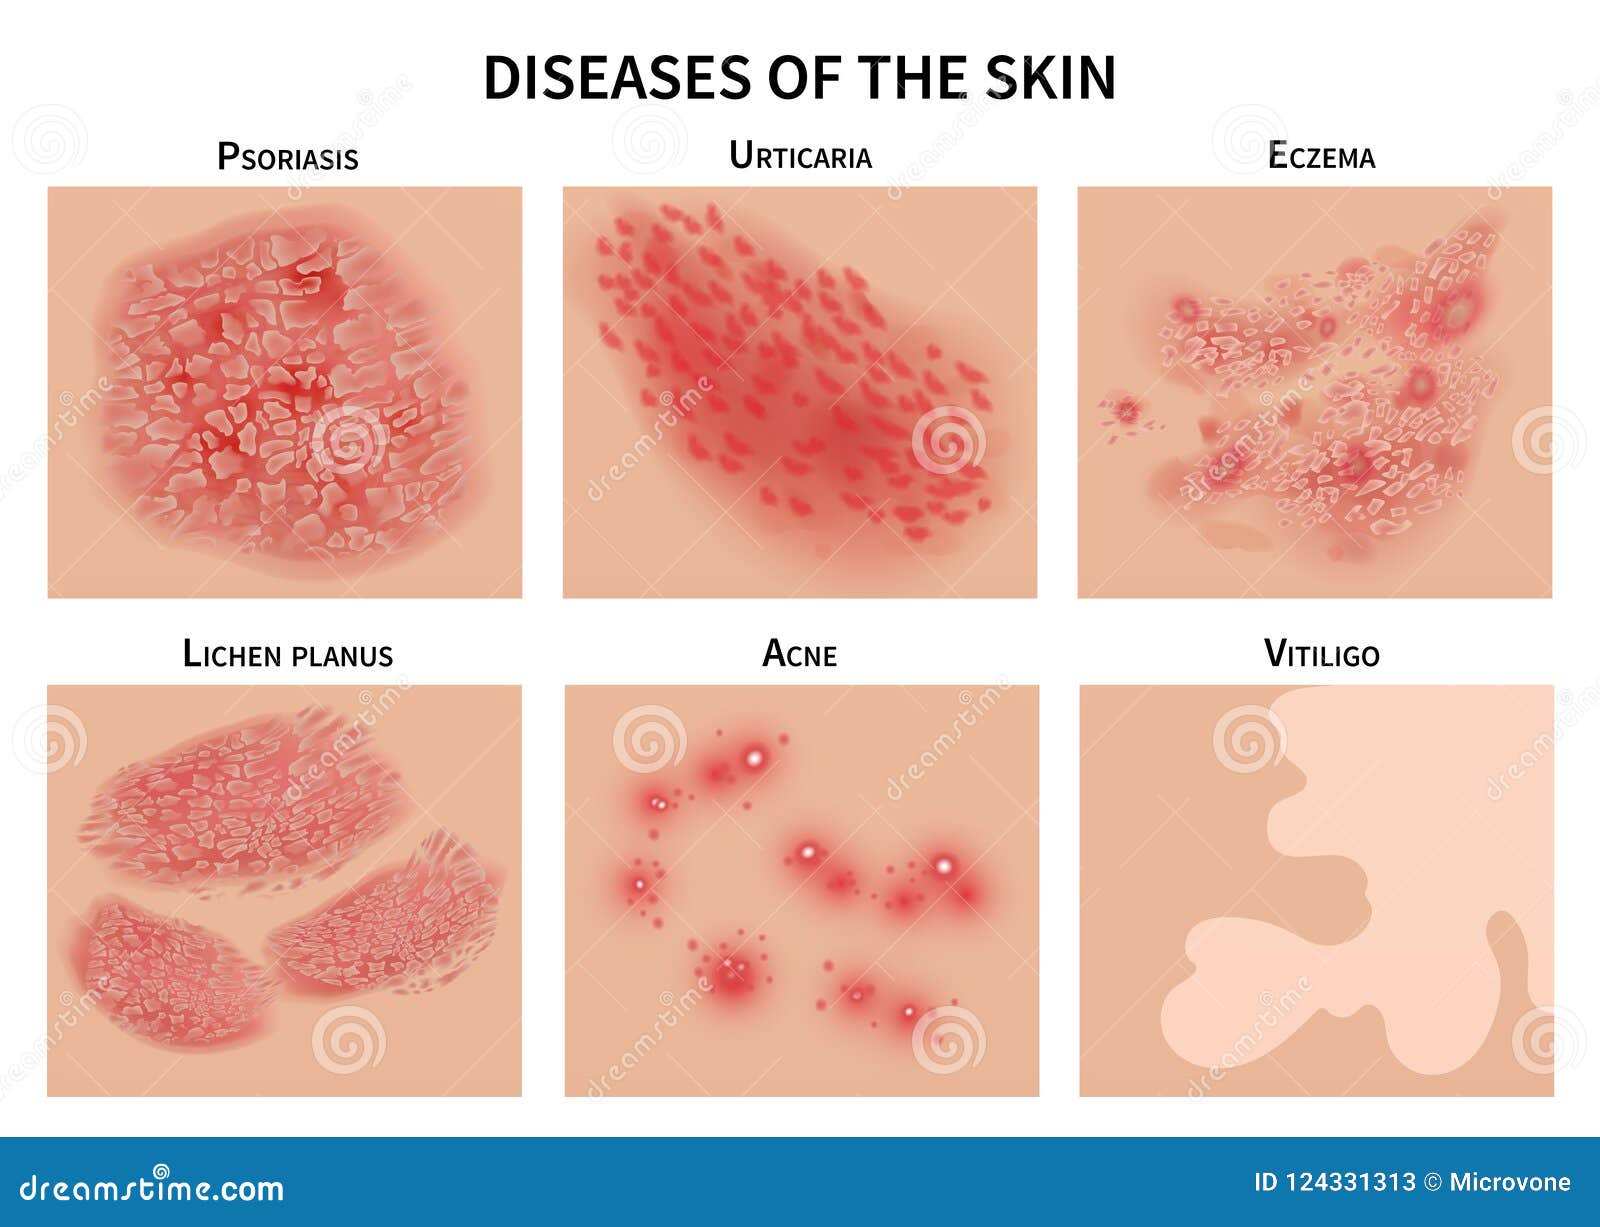 psoriasis skin condition pictures)